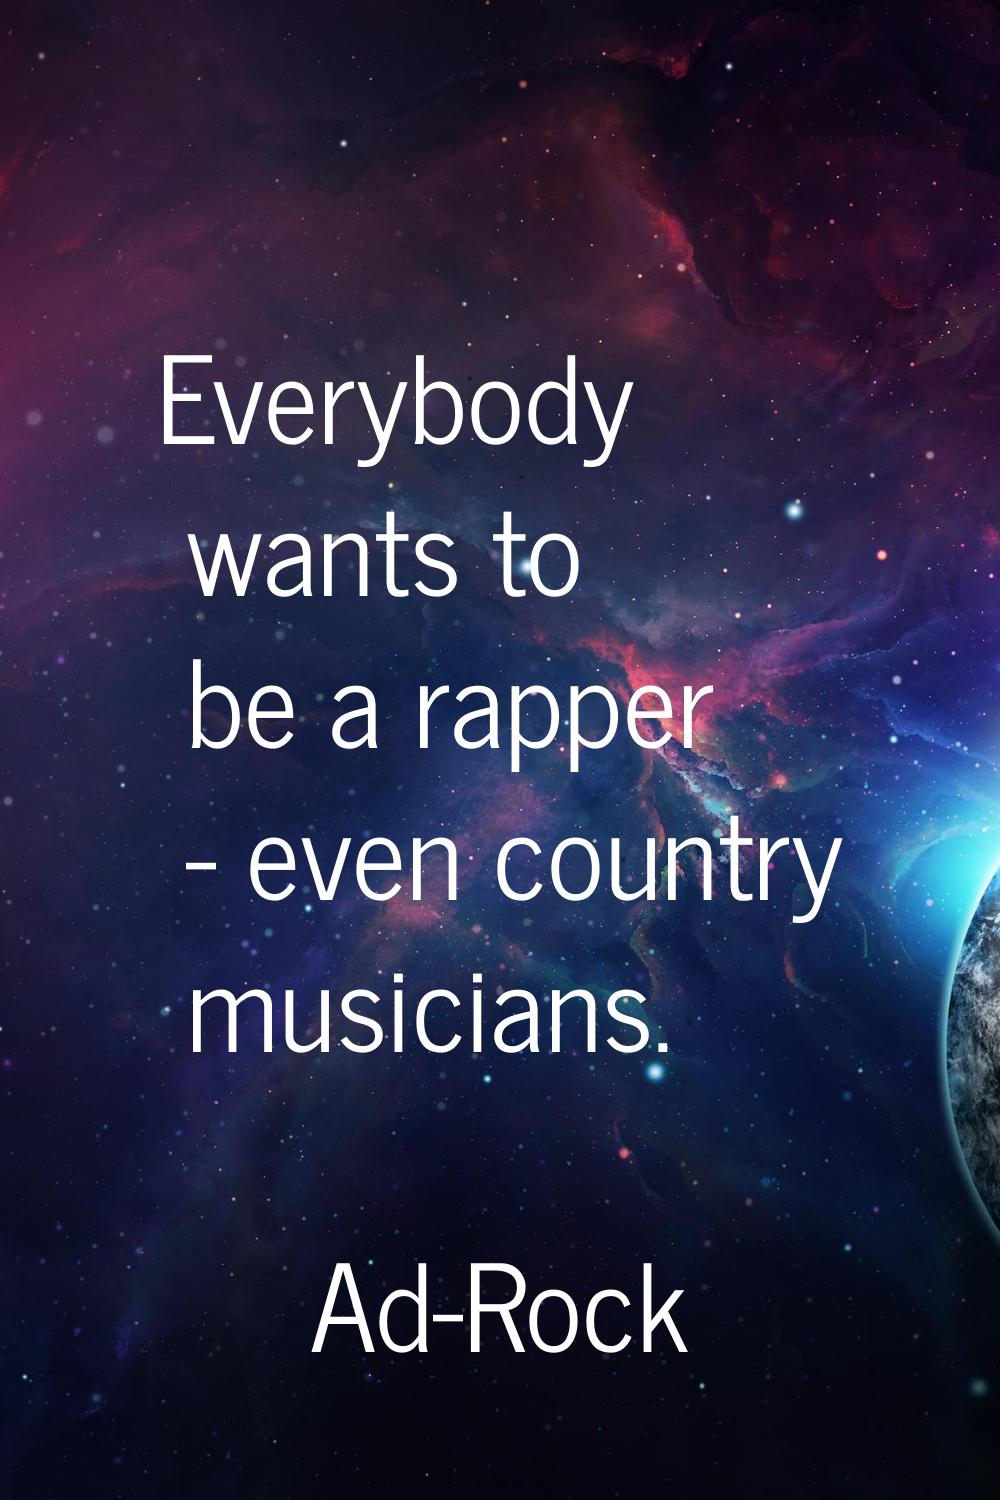 Everybody wants to be a rapper - even country musicians.